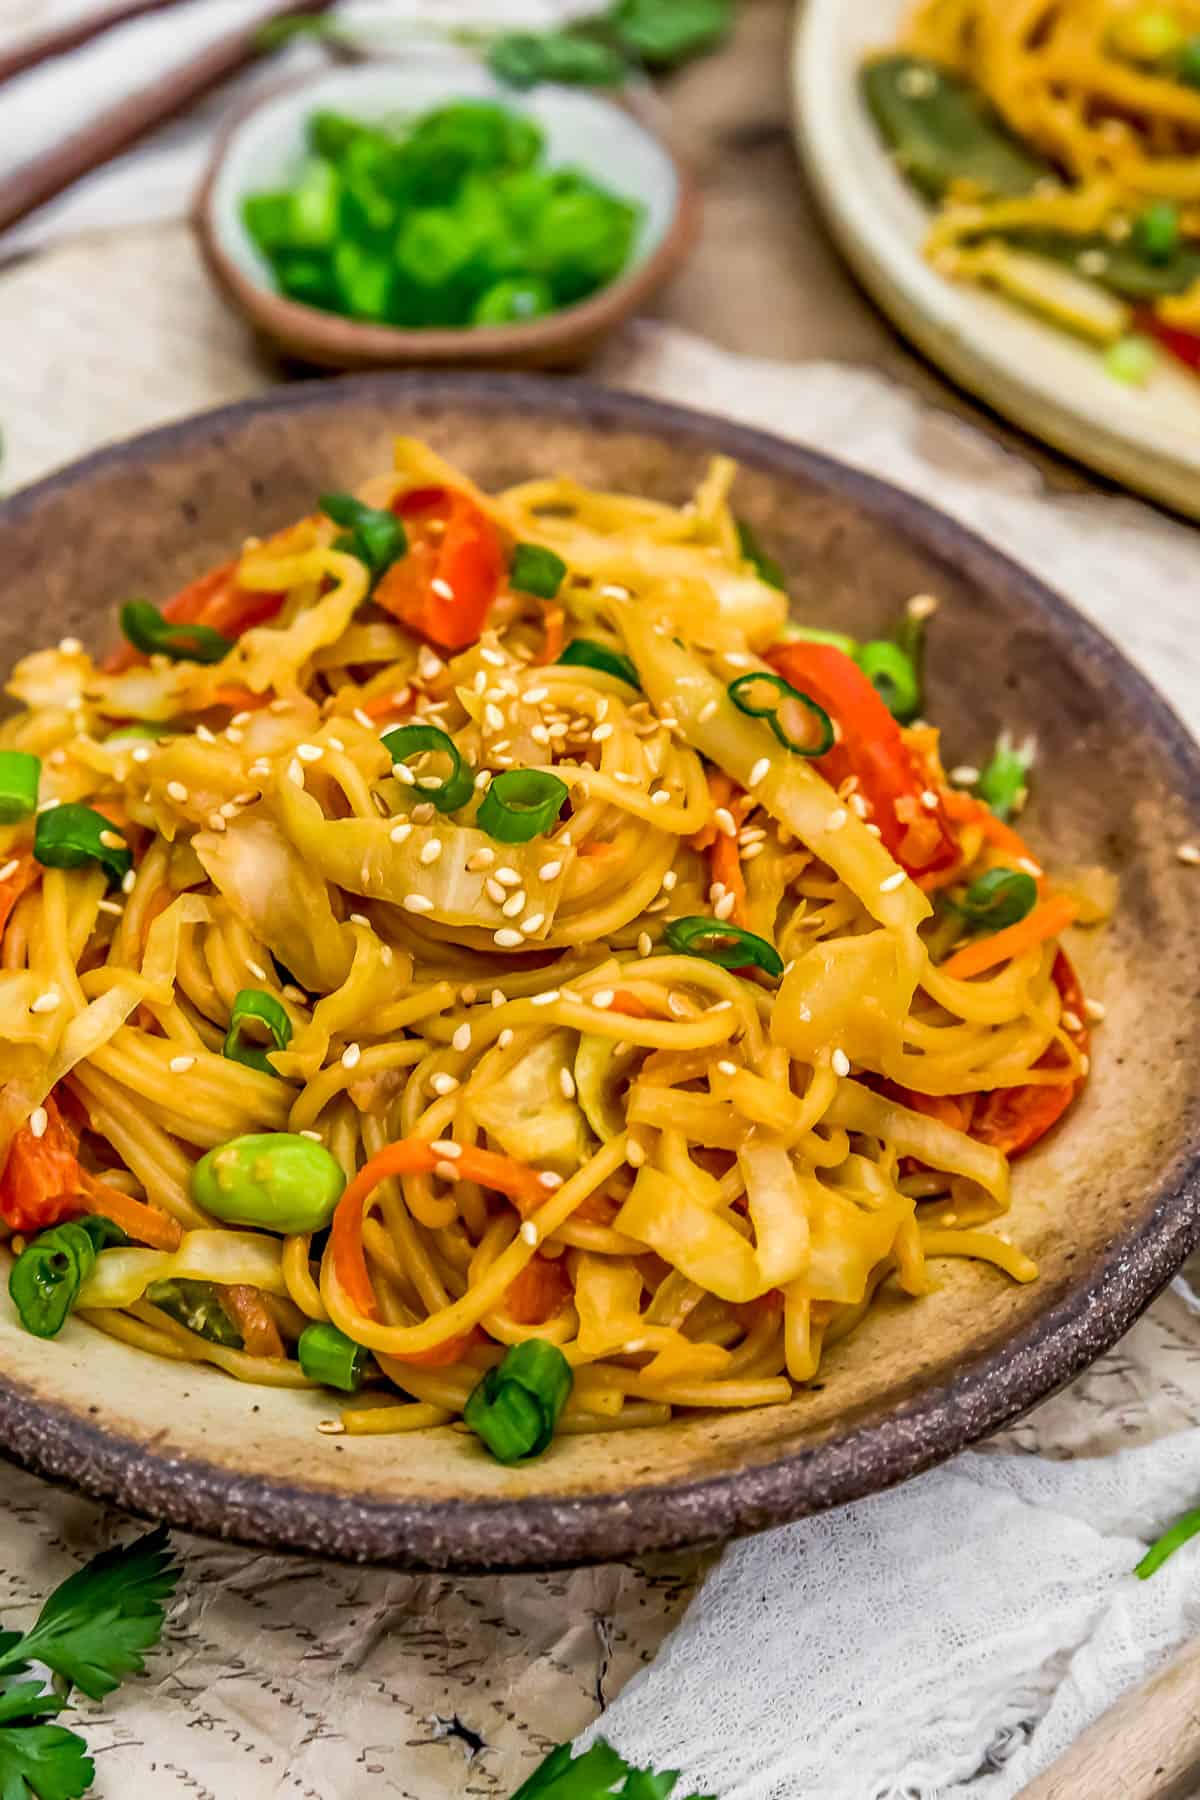 Bowl of Sweet and Sour Cabbage Noodle Stir Fry